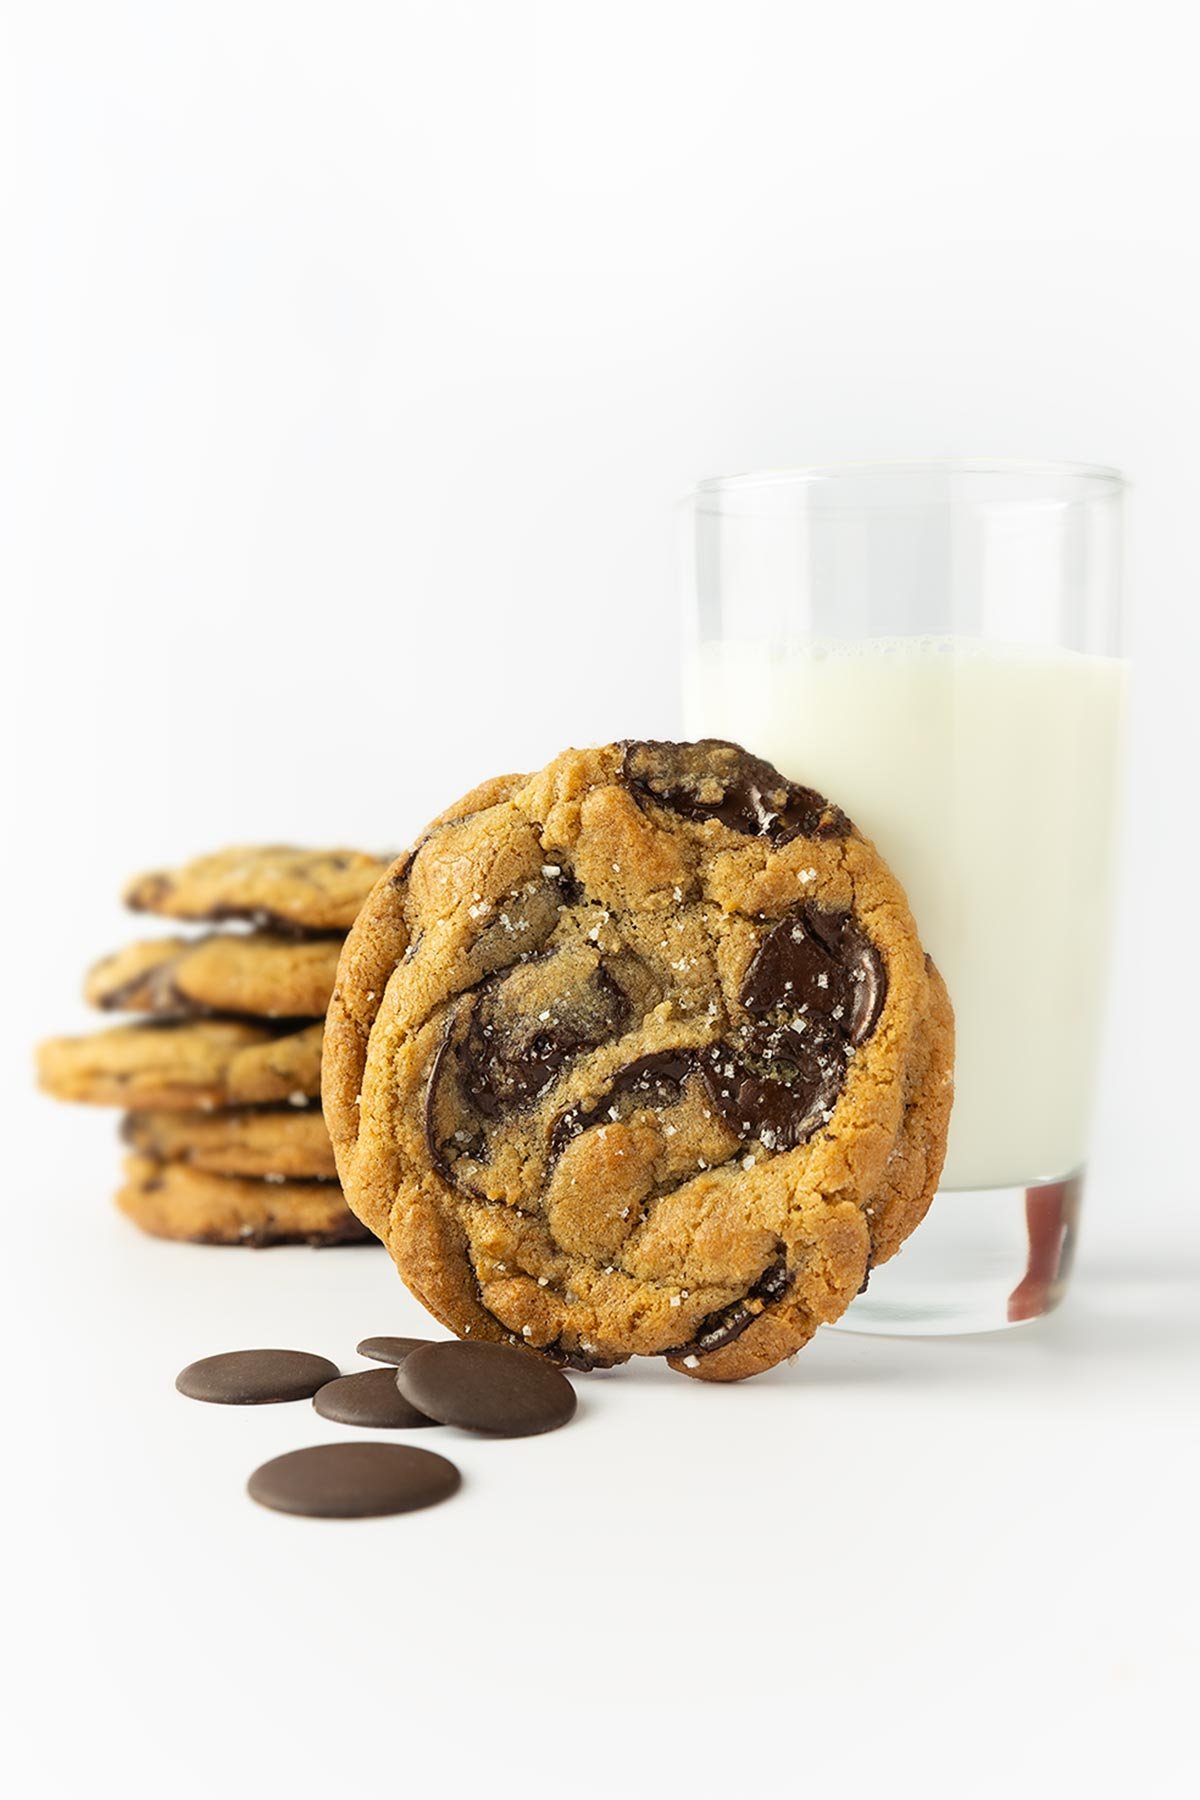 A New York Times chocolate chip cookie (David Leite), leaning against a glass of milk; a stack of cookies in back.